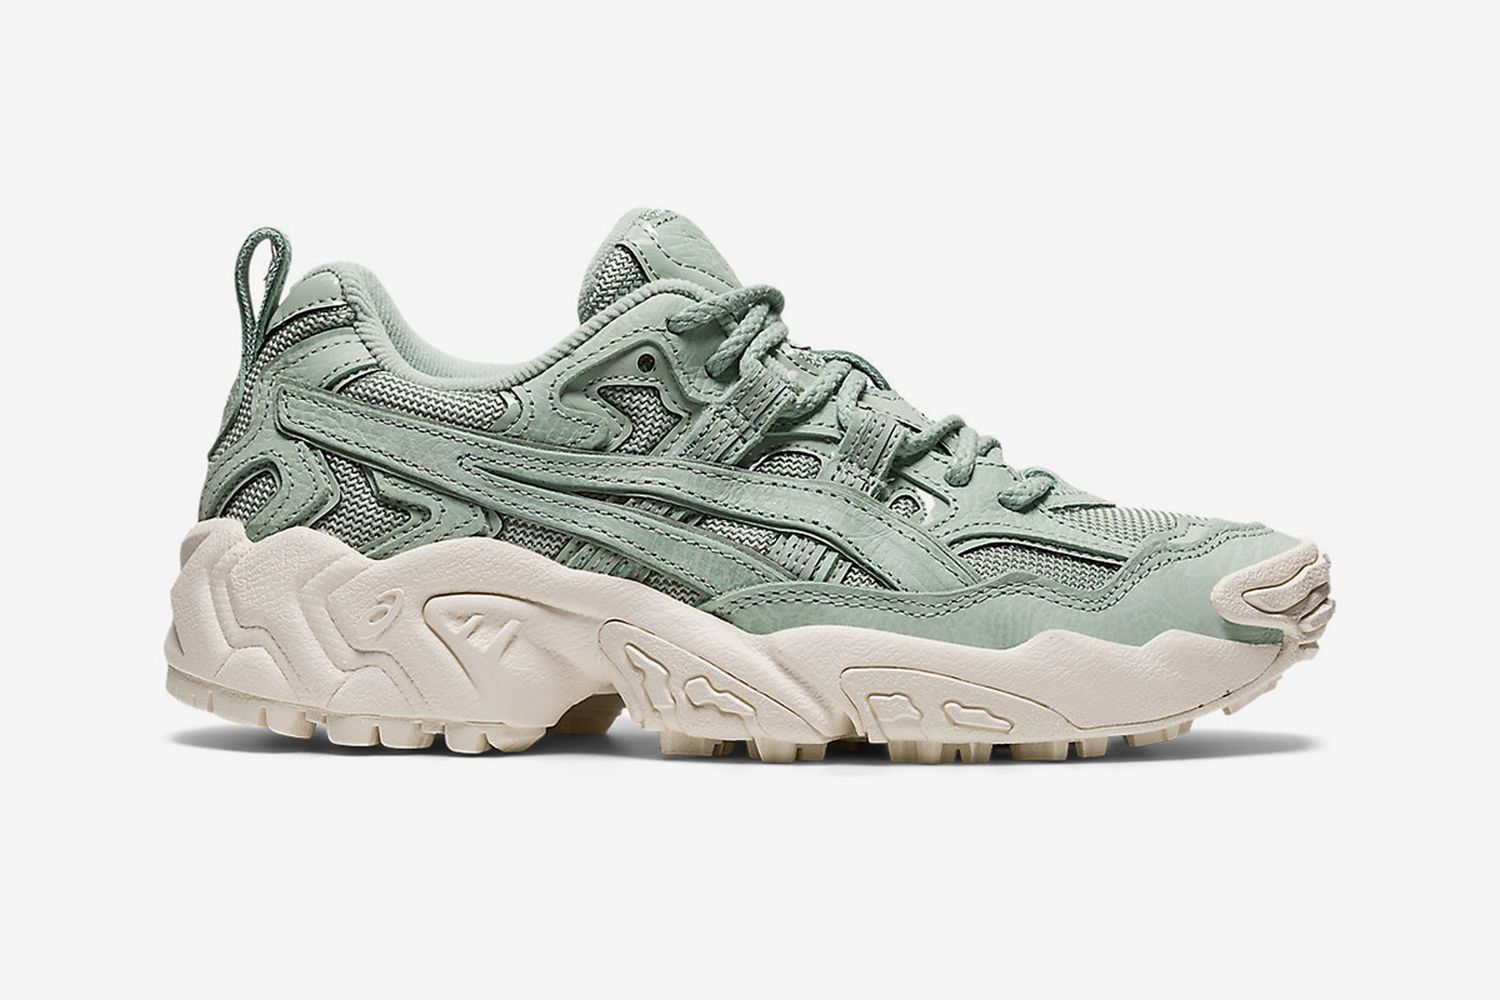 10 of the Best ASICS Sneakers to Wear in Spring 2021